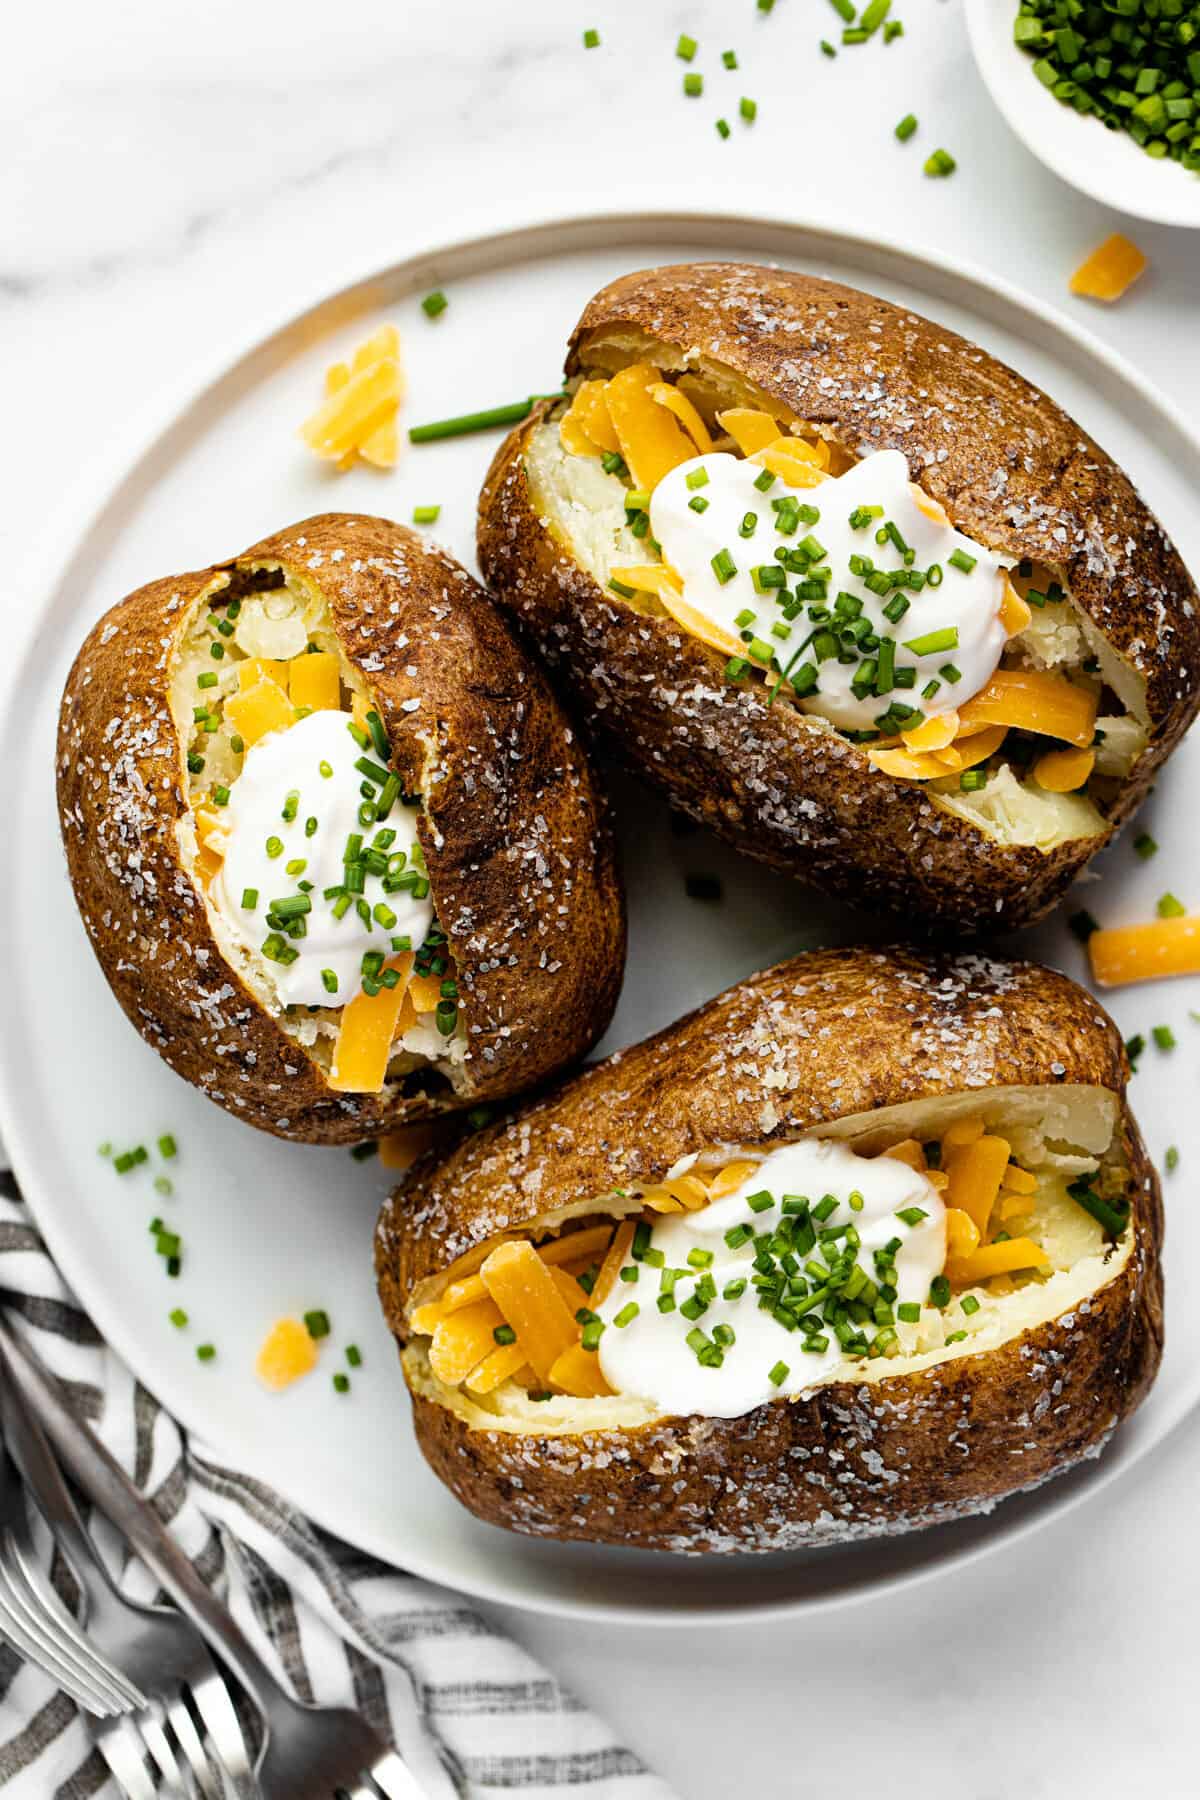 White plate filled with air fryer baked potatoes topped with cheese and sour cream